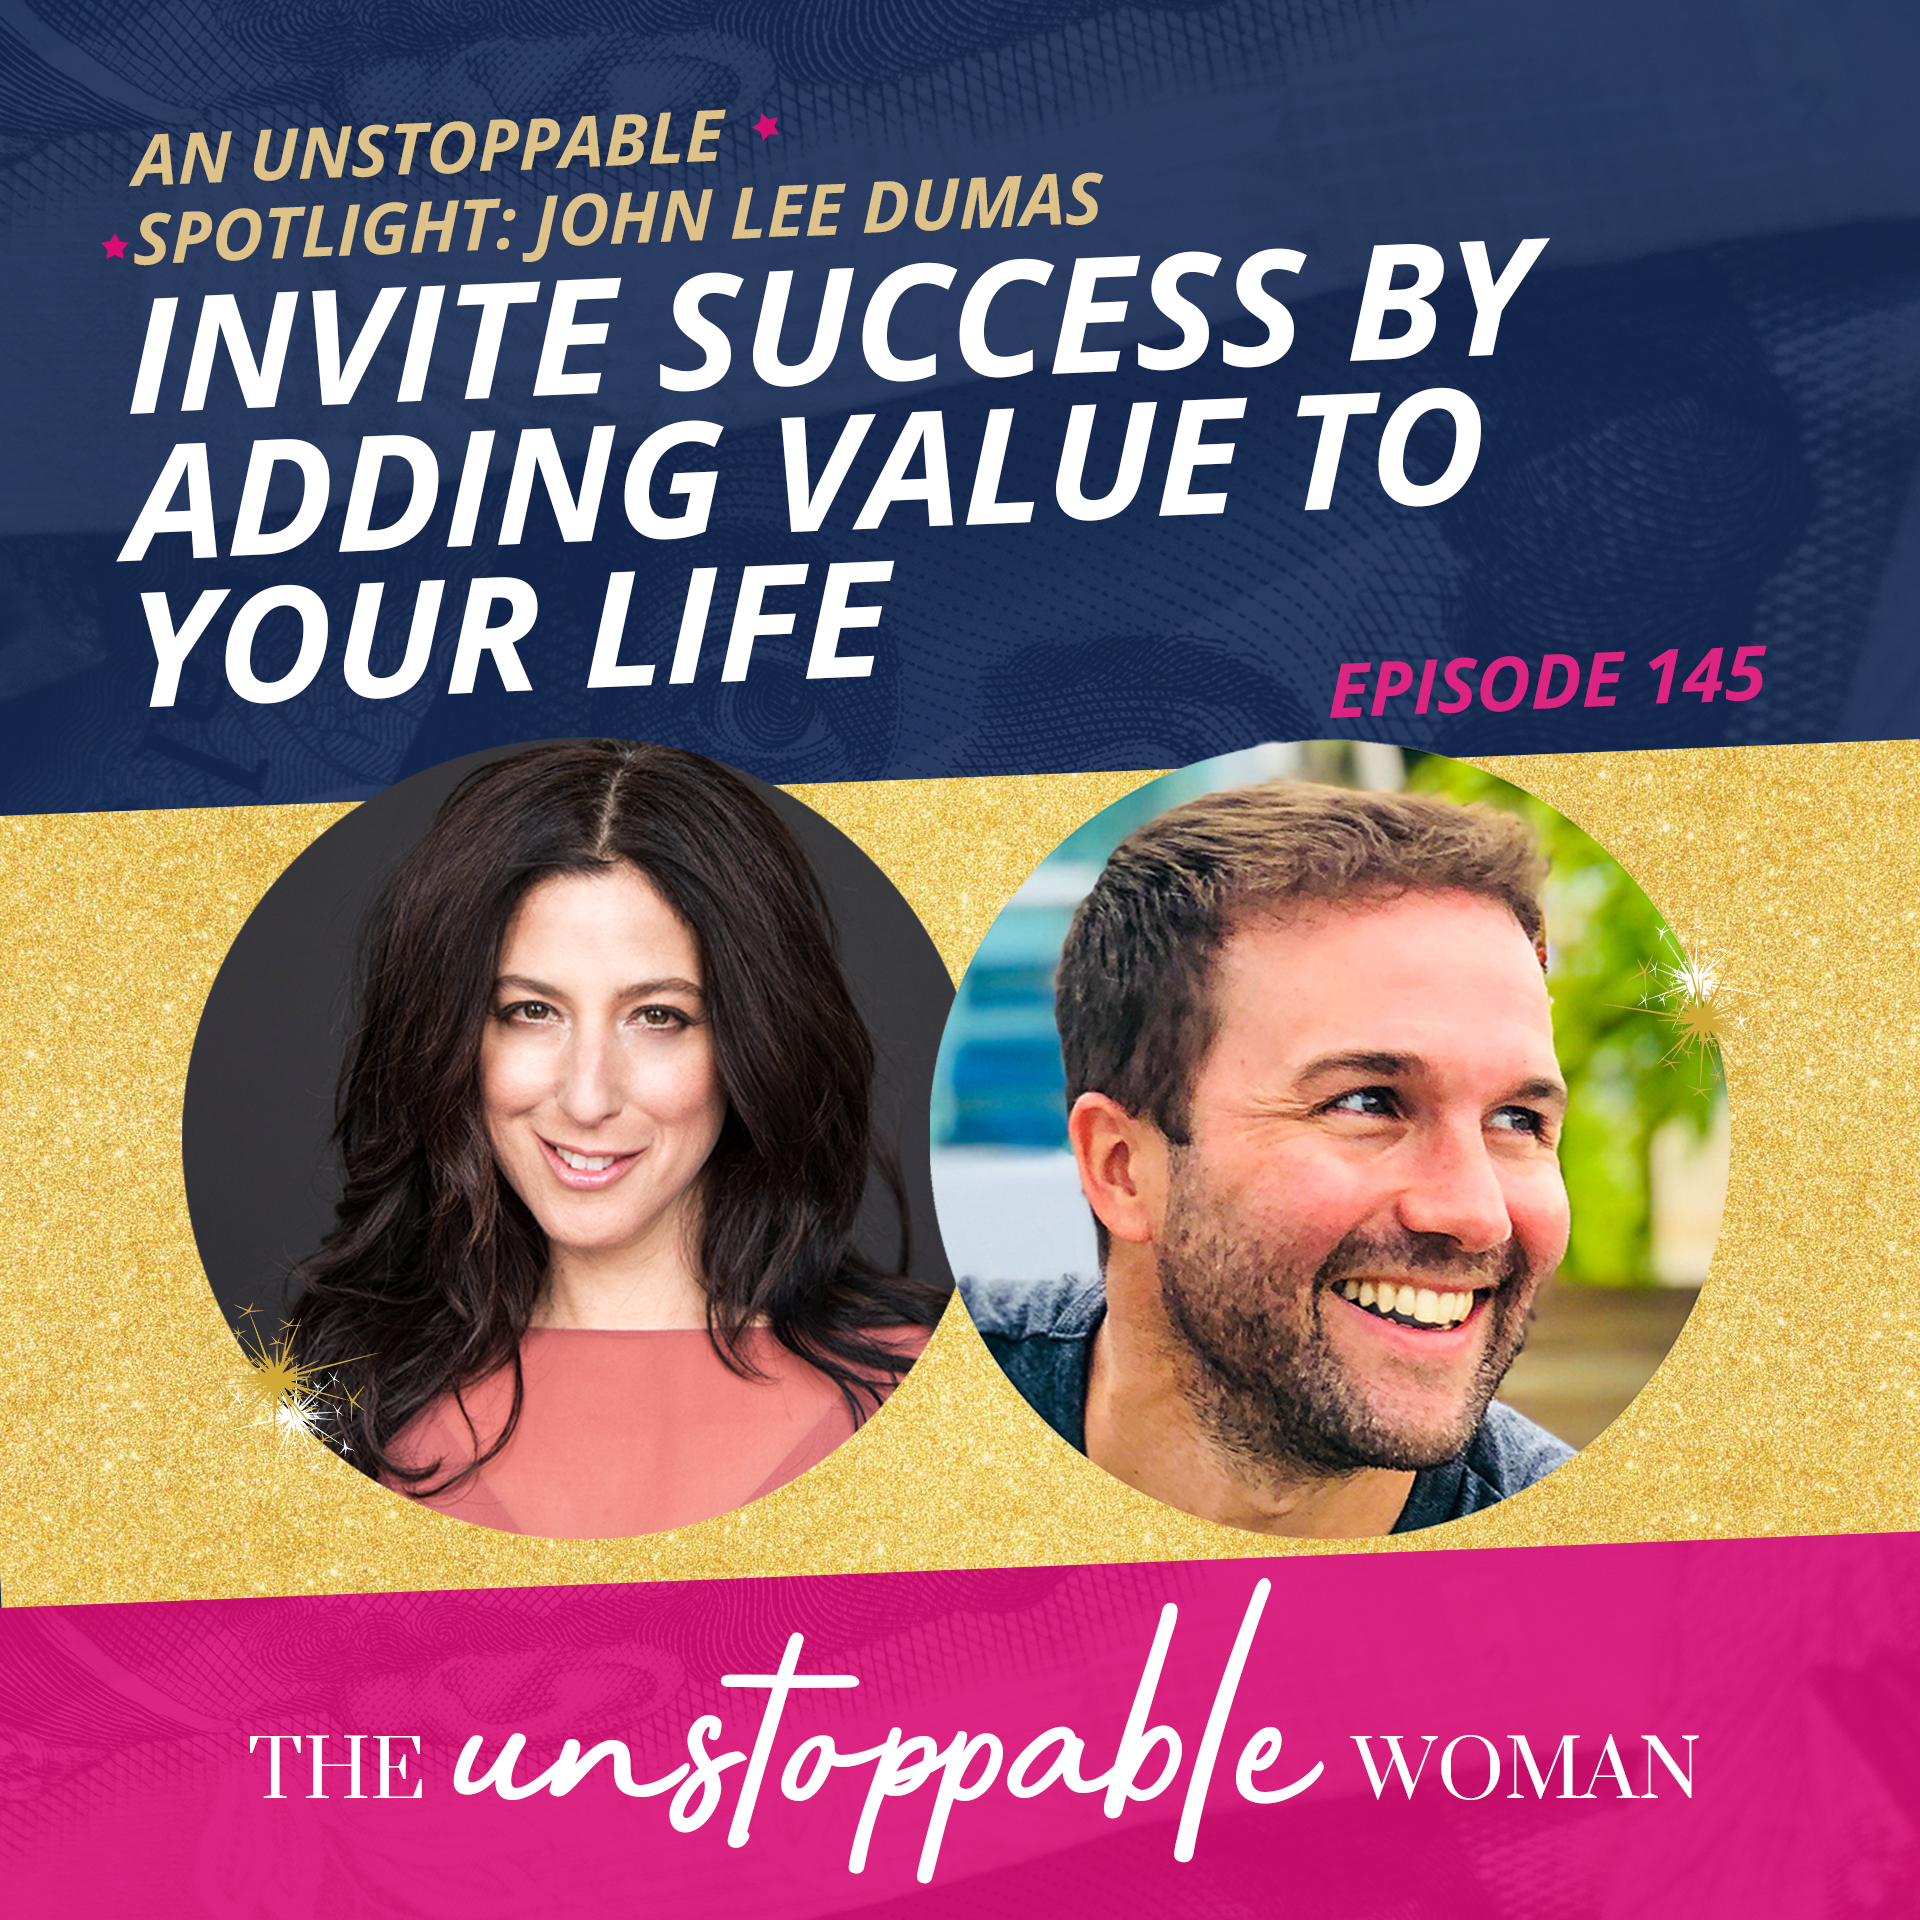 Invite Success by Adding Value to Your Life | An Unstoppable Spotlight | John Lee Dumas